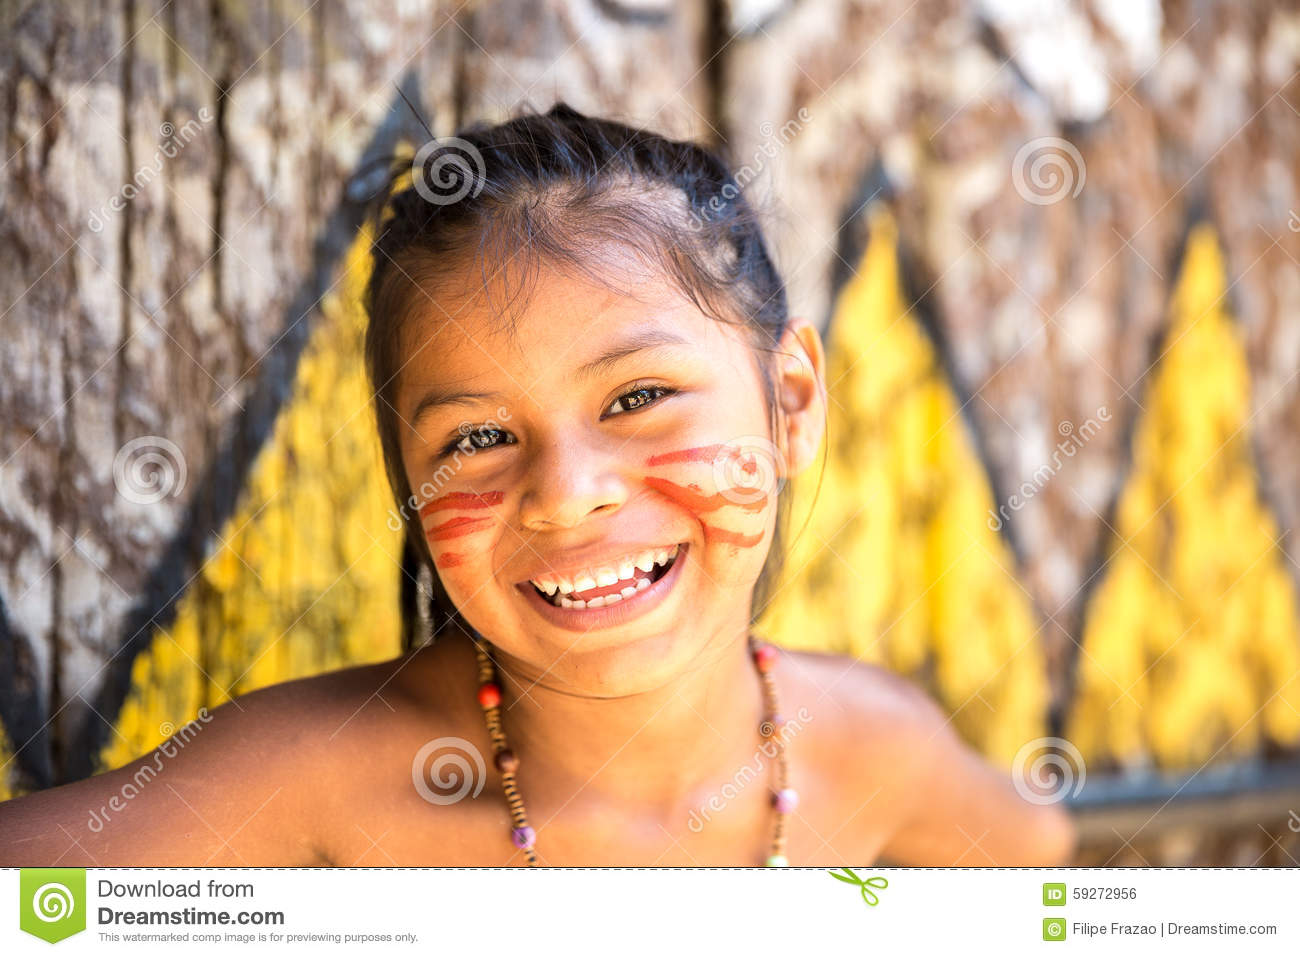 Native Brazilian Girl Smiling At An Indigenous Tribe In The Amazon.